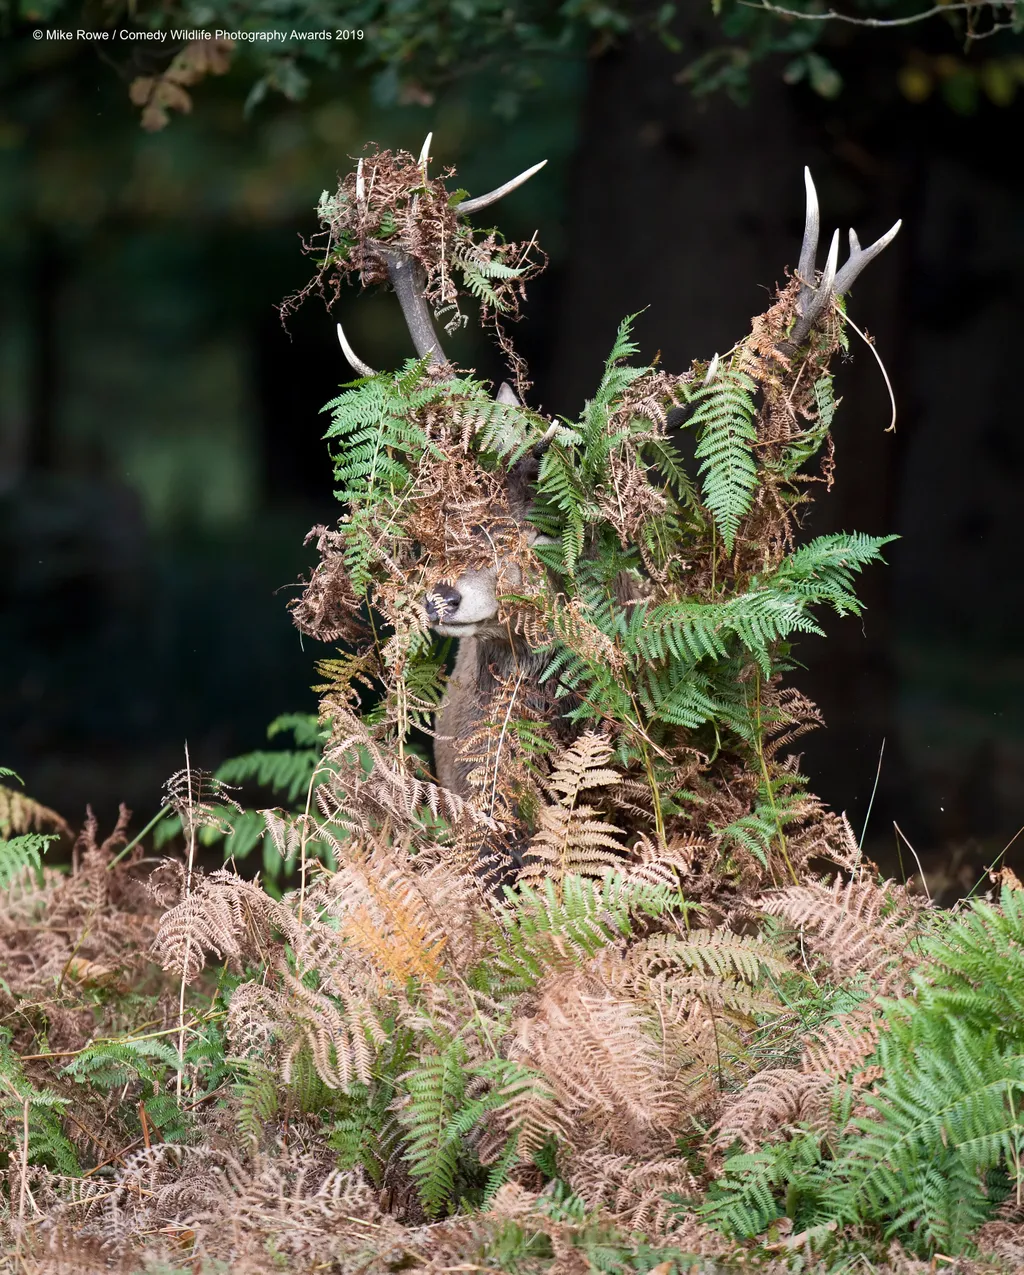 The Comedy Wildlife Photography Awards 2019
Mike Rowe
Farnham
United Kingdom
Phone: 07790 225268
Email: mikerowephoto@outlook.com
Title: Deer - What Deer?
Description: Shooting the Red Deer rut in Richmond Park, I noticed this deer covered in bracken.  It